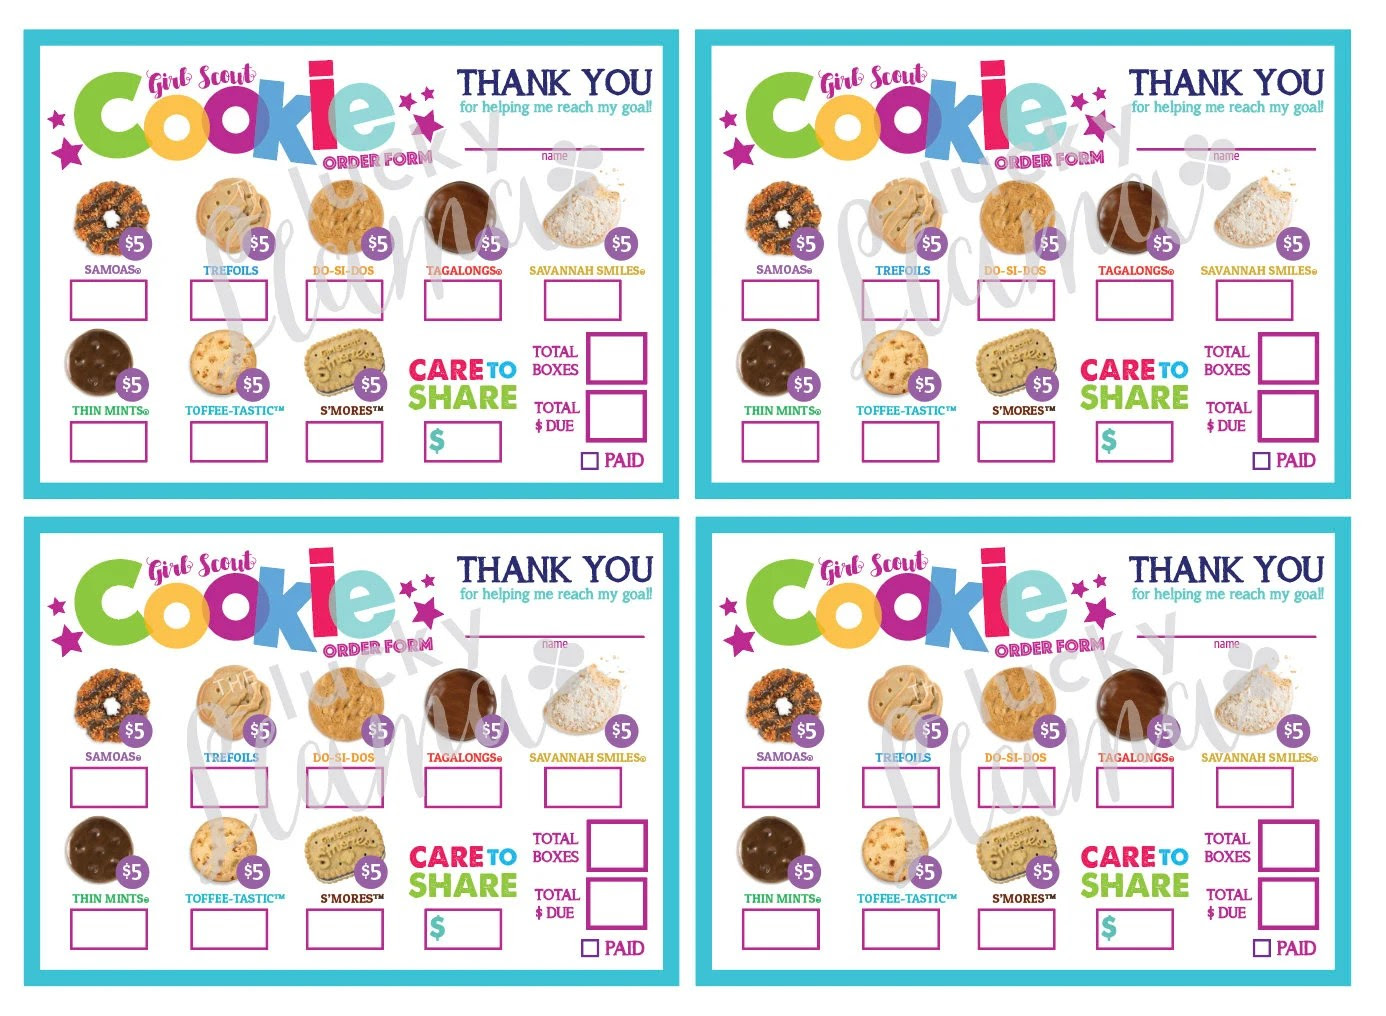 Girl Scout Cookies Order Form Printable That Are Irresistible